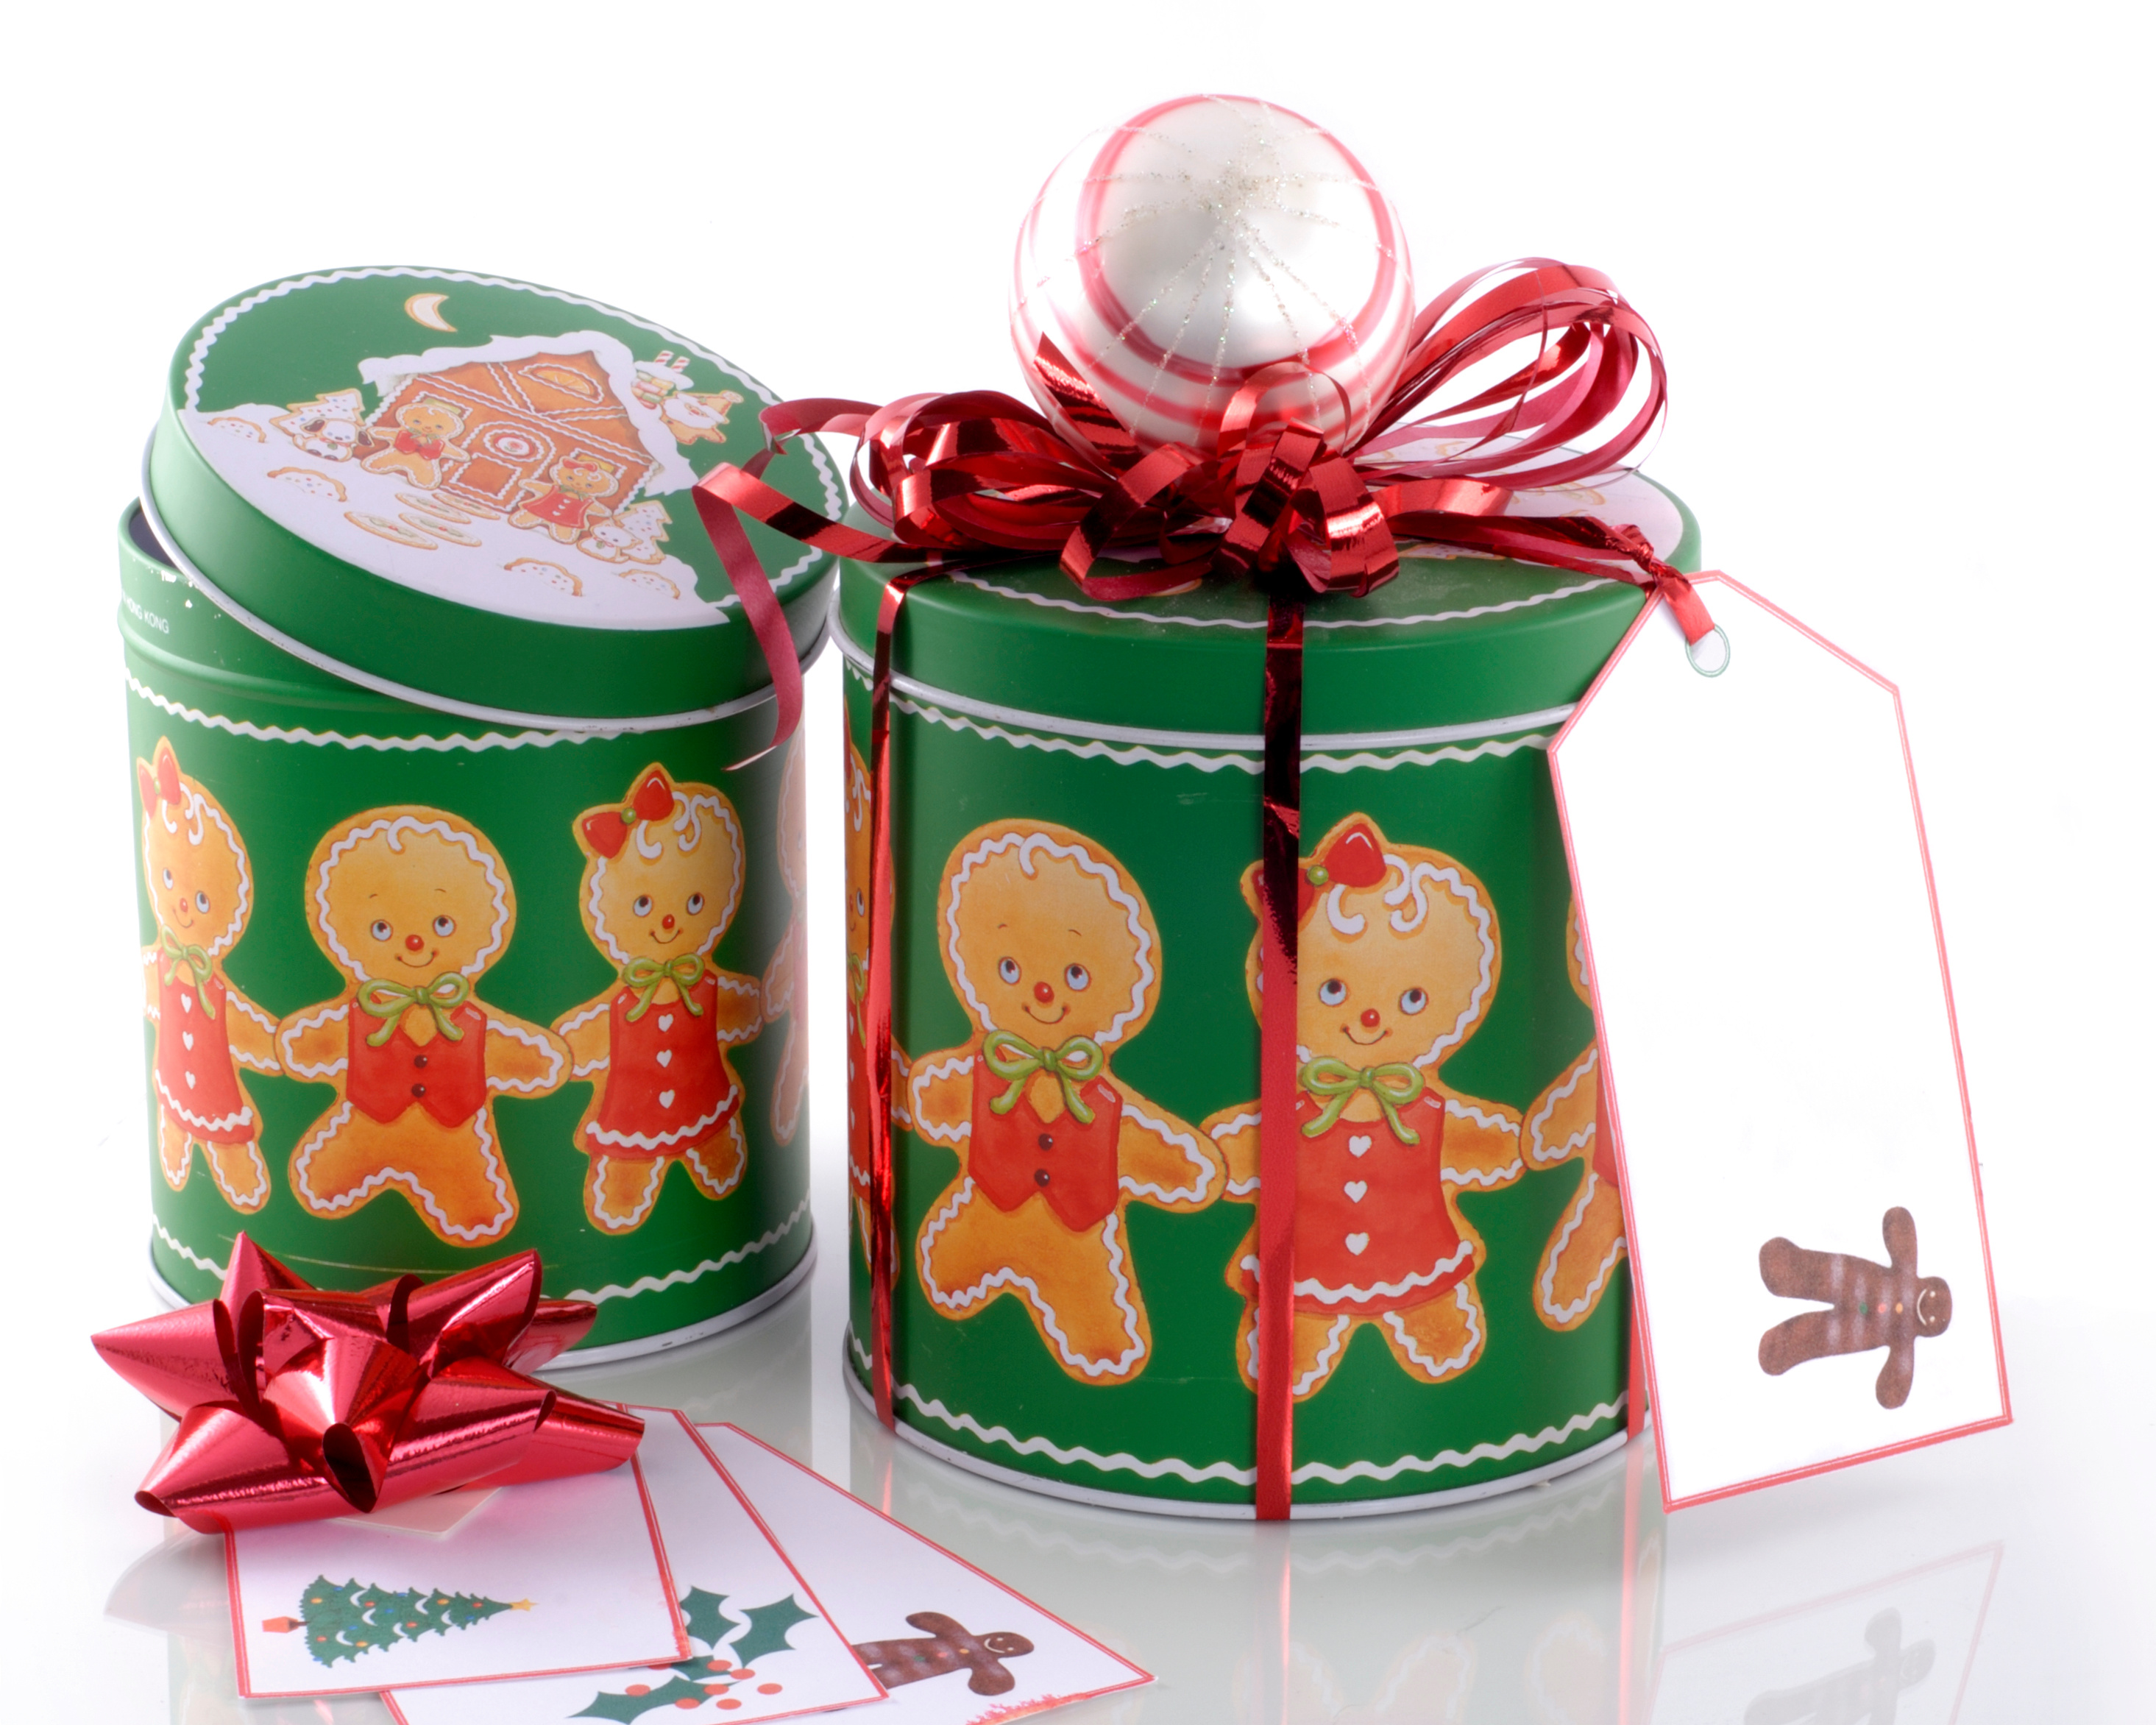 Image of a two green Christmas tins with gingerbread men on othem and some blank gift tags laying beside them.